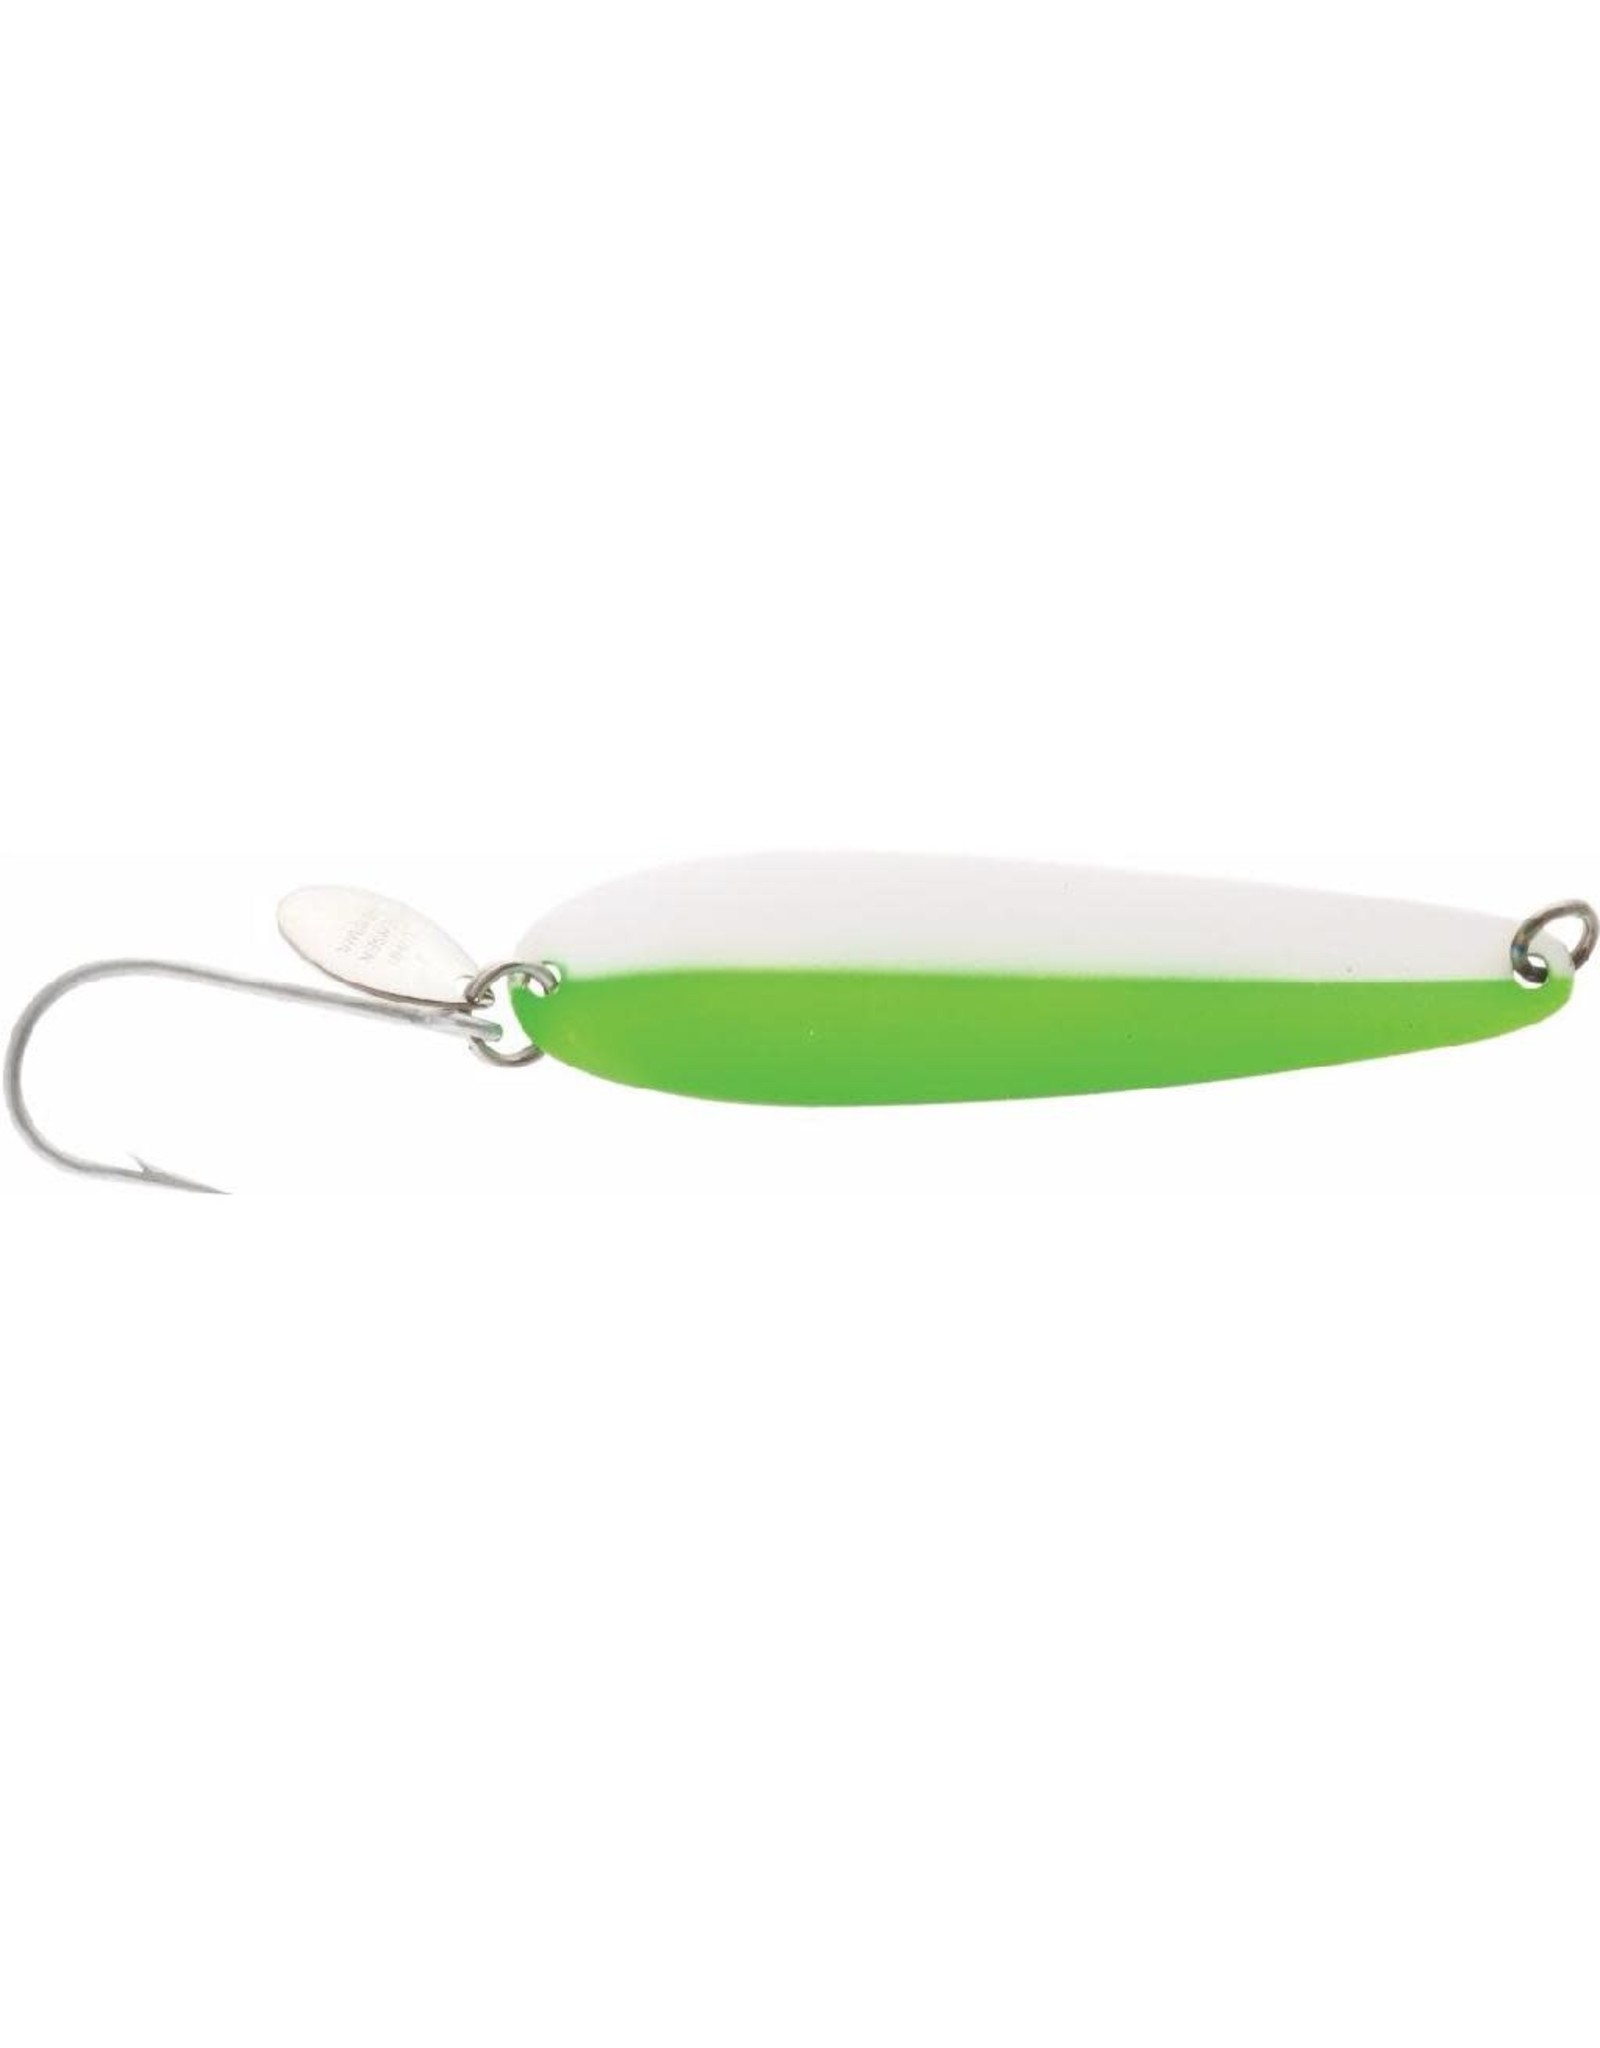 Luhr Jensen Coyote Spoon, 3, Everglo/Fluorescent - Larry's Sporting Goods